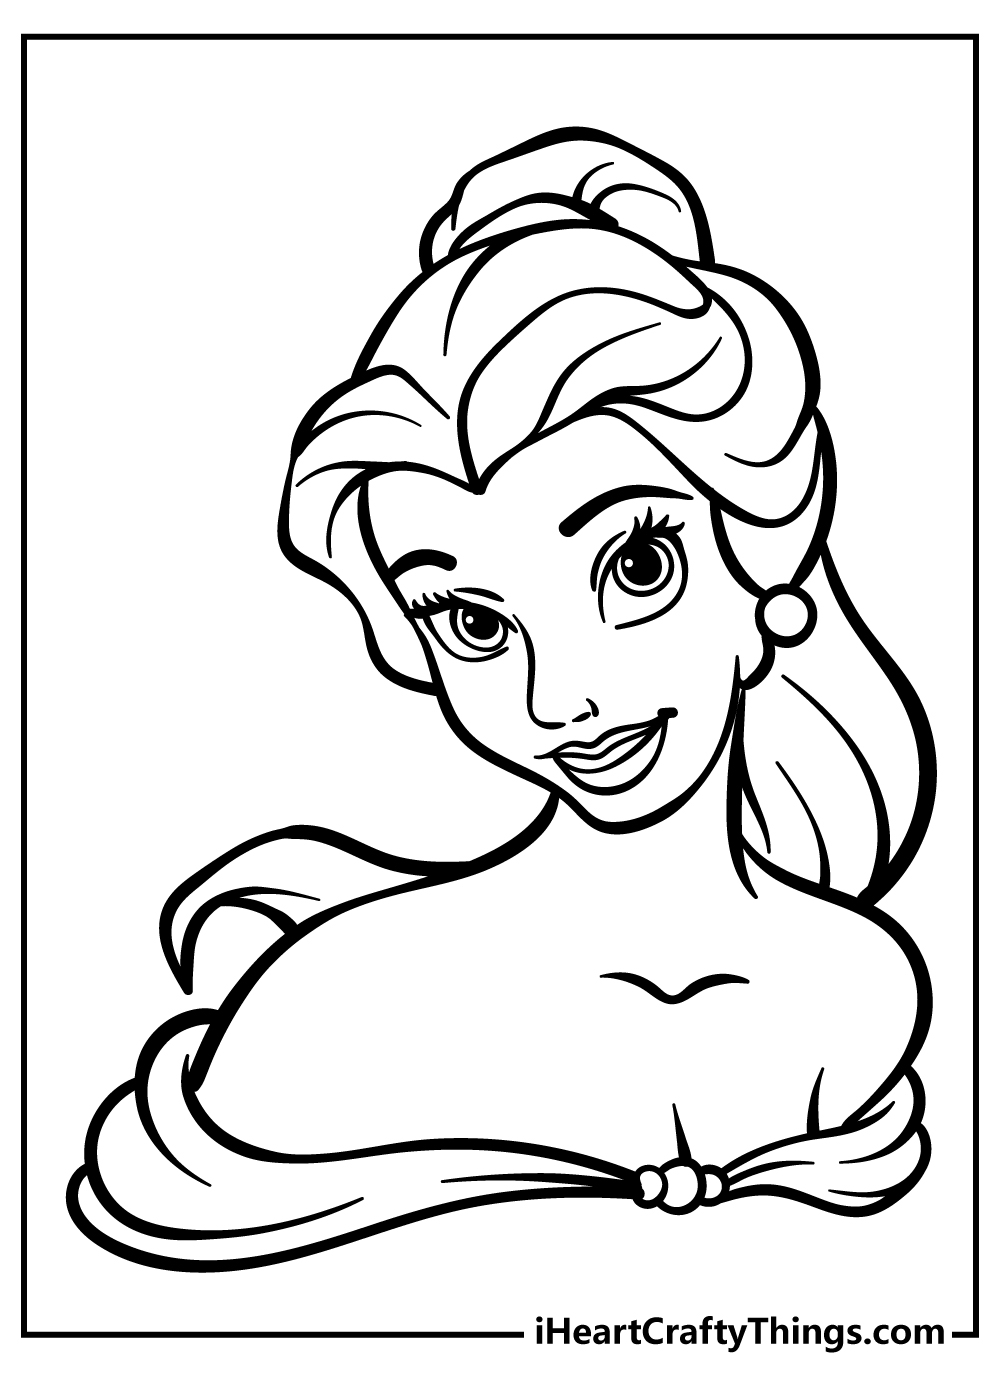 Belle Coloring Pages for preschoolers free printable